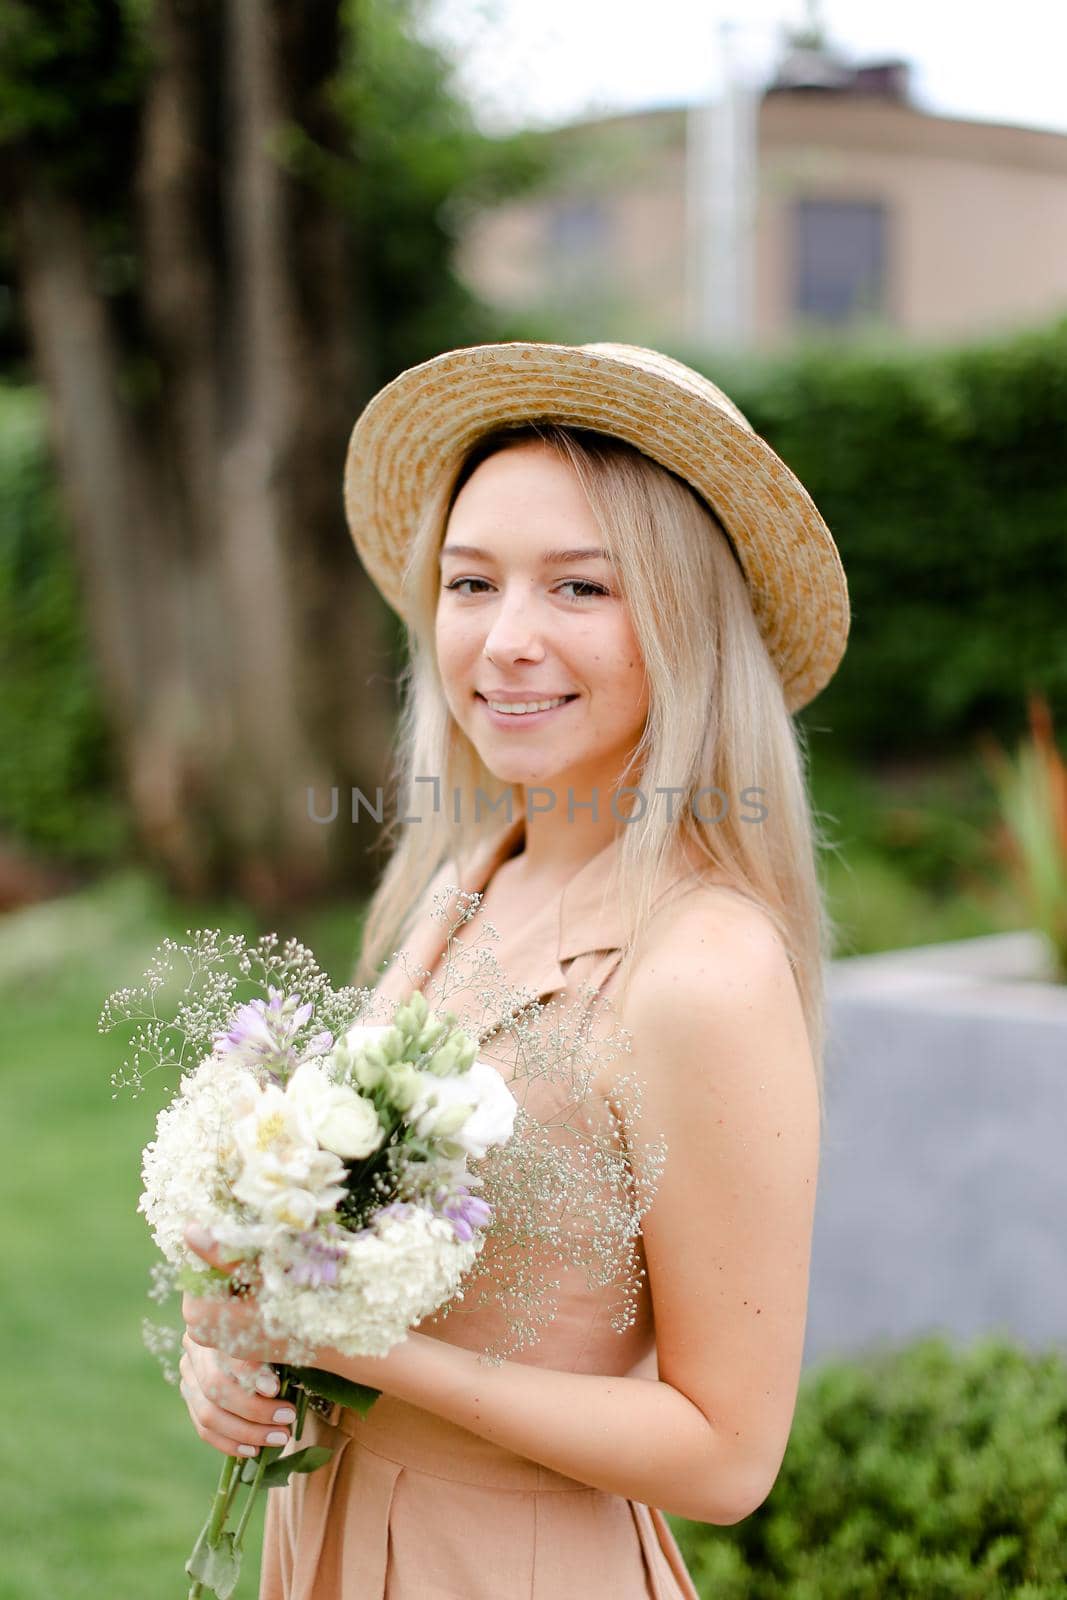 Young blonde girl standing in yeard with bouquet of flowers and wearing hat with overalls. Concept of yuoth and summer season, fashion.